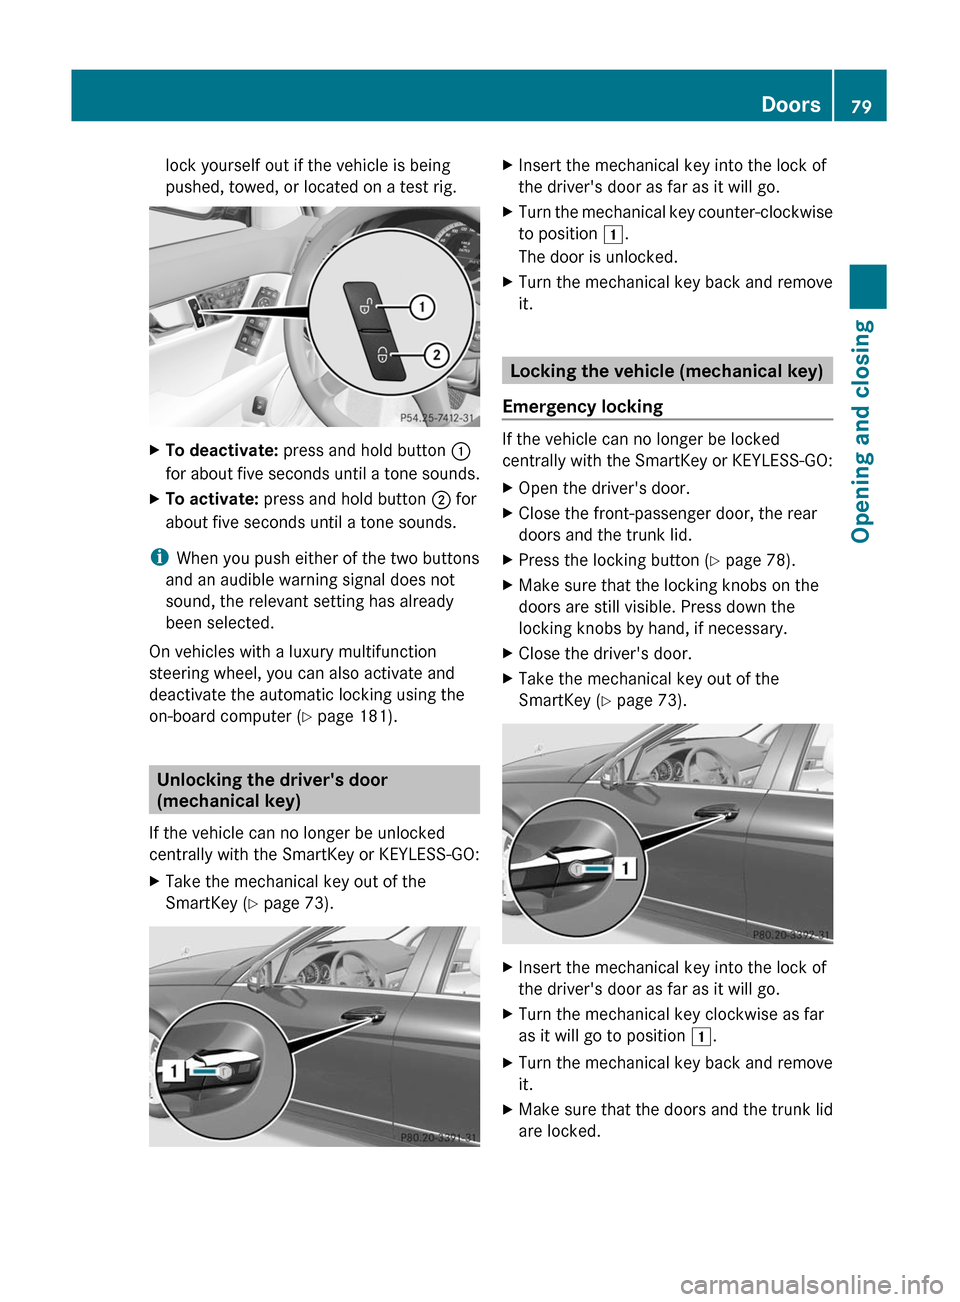 MERCEDES-BENZ C-Class 2011 W204 Owners Guide lock yourself out if the vehicle is being
pushed, towed, or located on a test rig.
XTo deactivate: press and hold button :
for about five seconds until a tone sounds.
XTo activate: press and hold butt